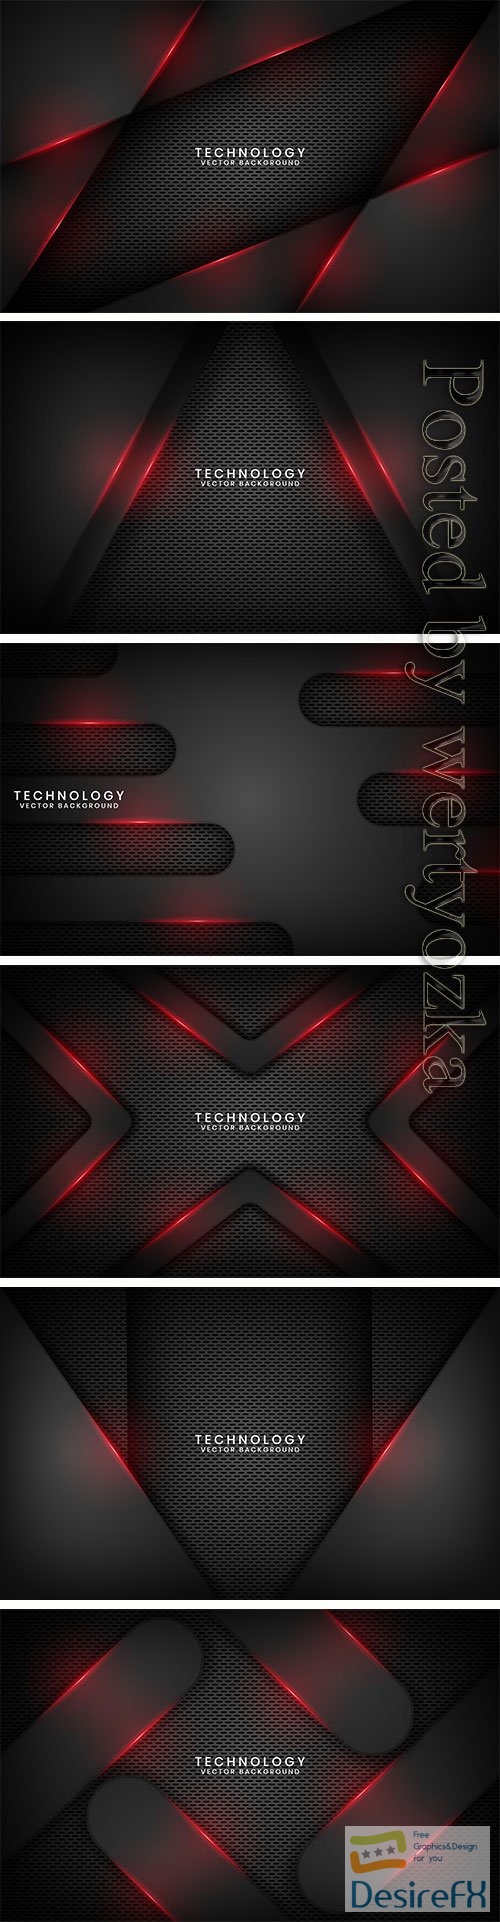 Abstract black metallic technology background with red light effect on dark space